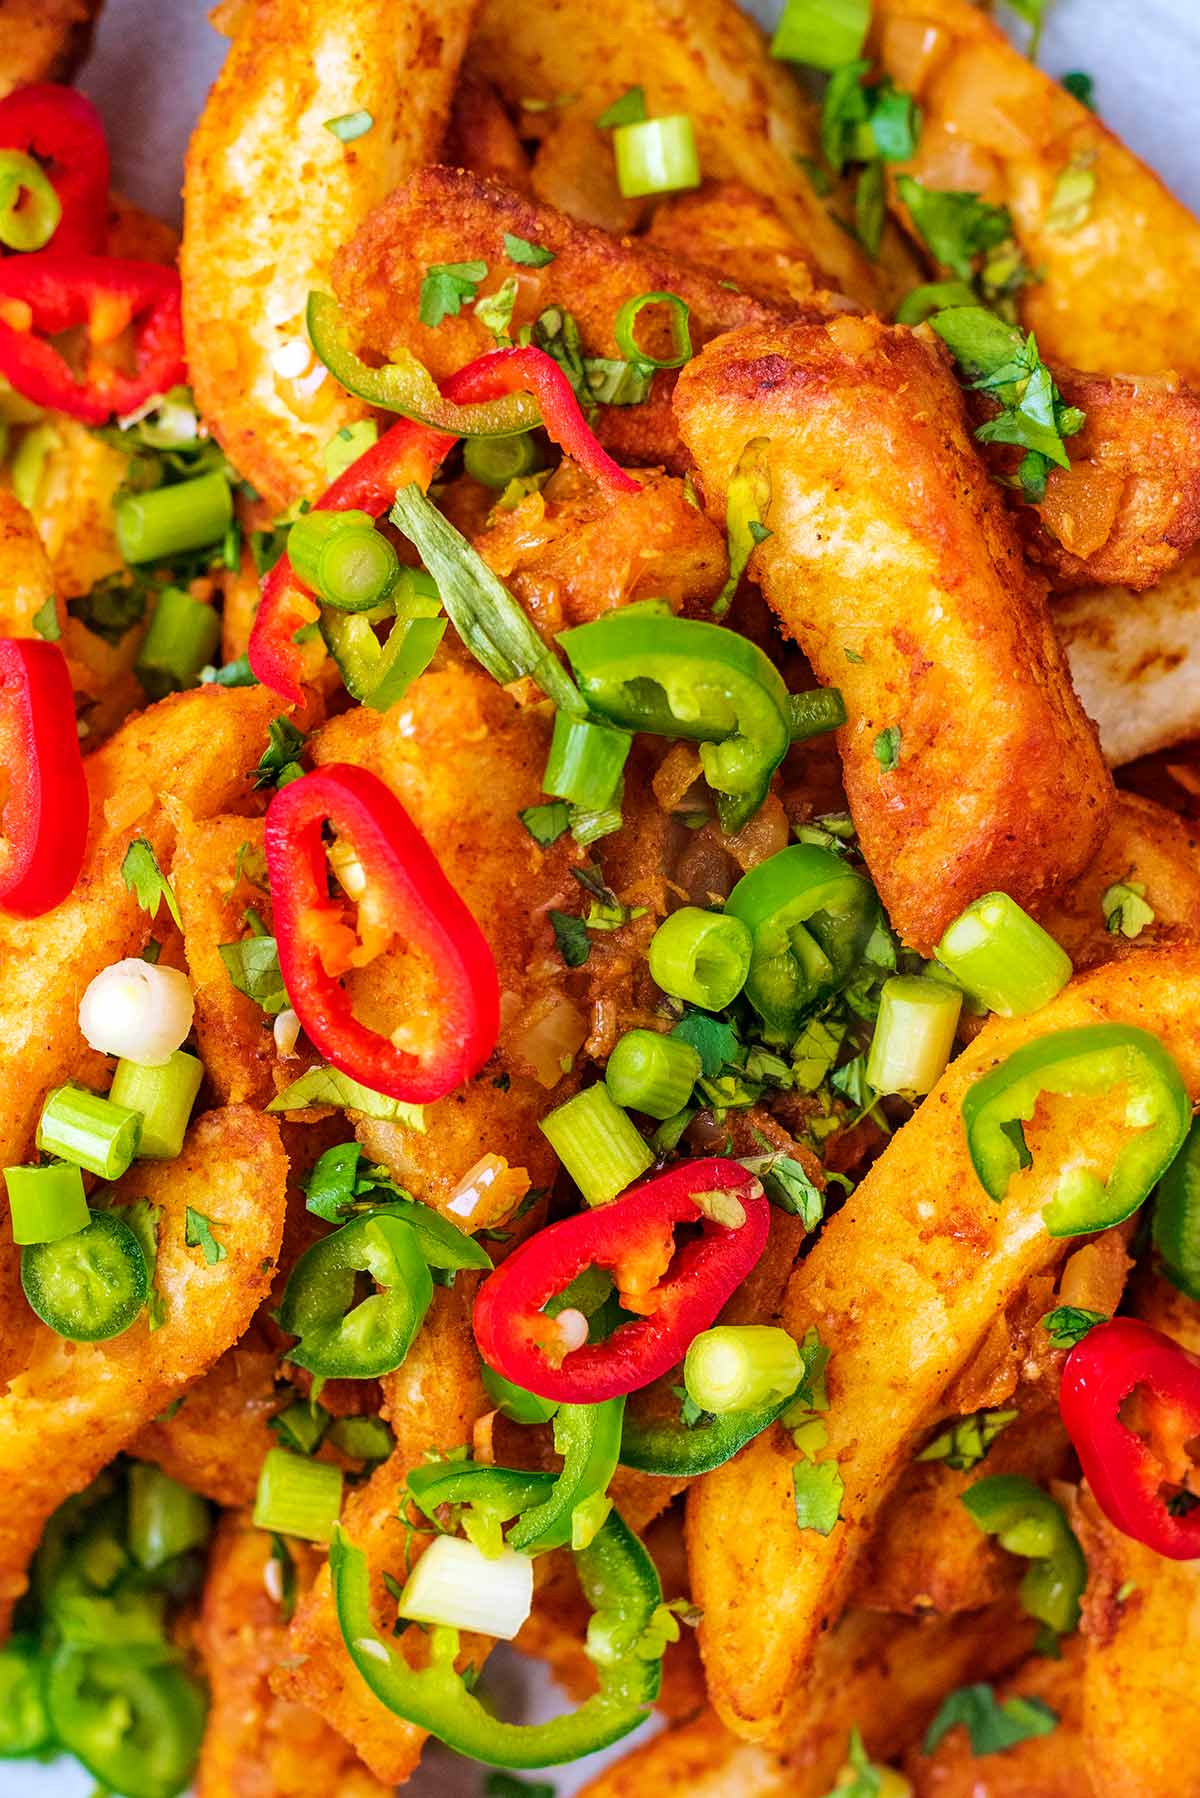 Masala chips topped with sliced chillies and chopped spring onions.